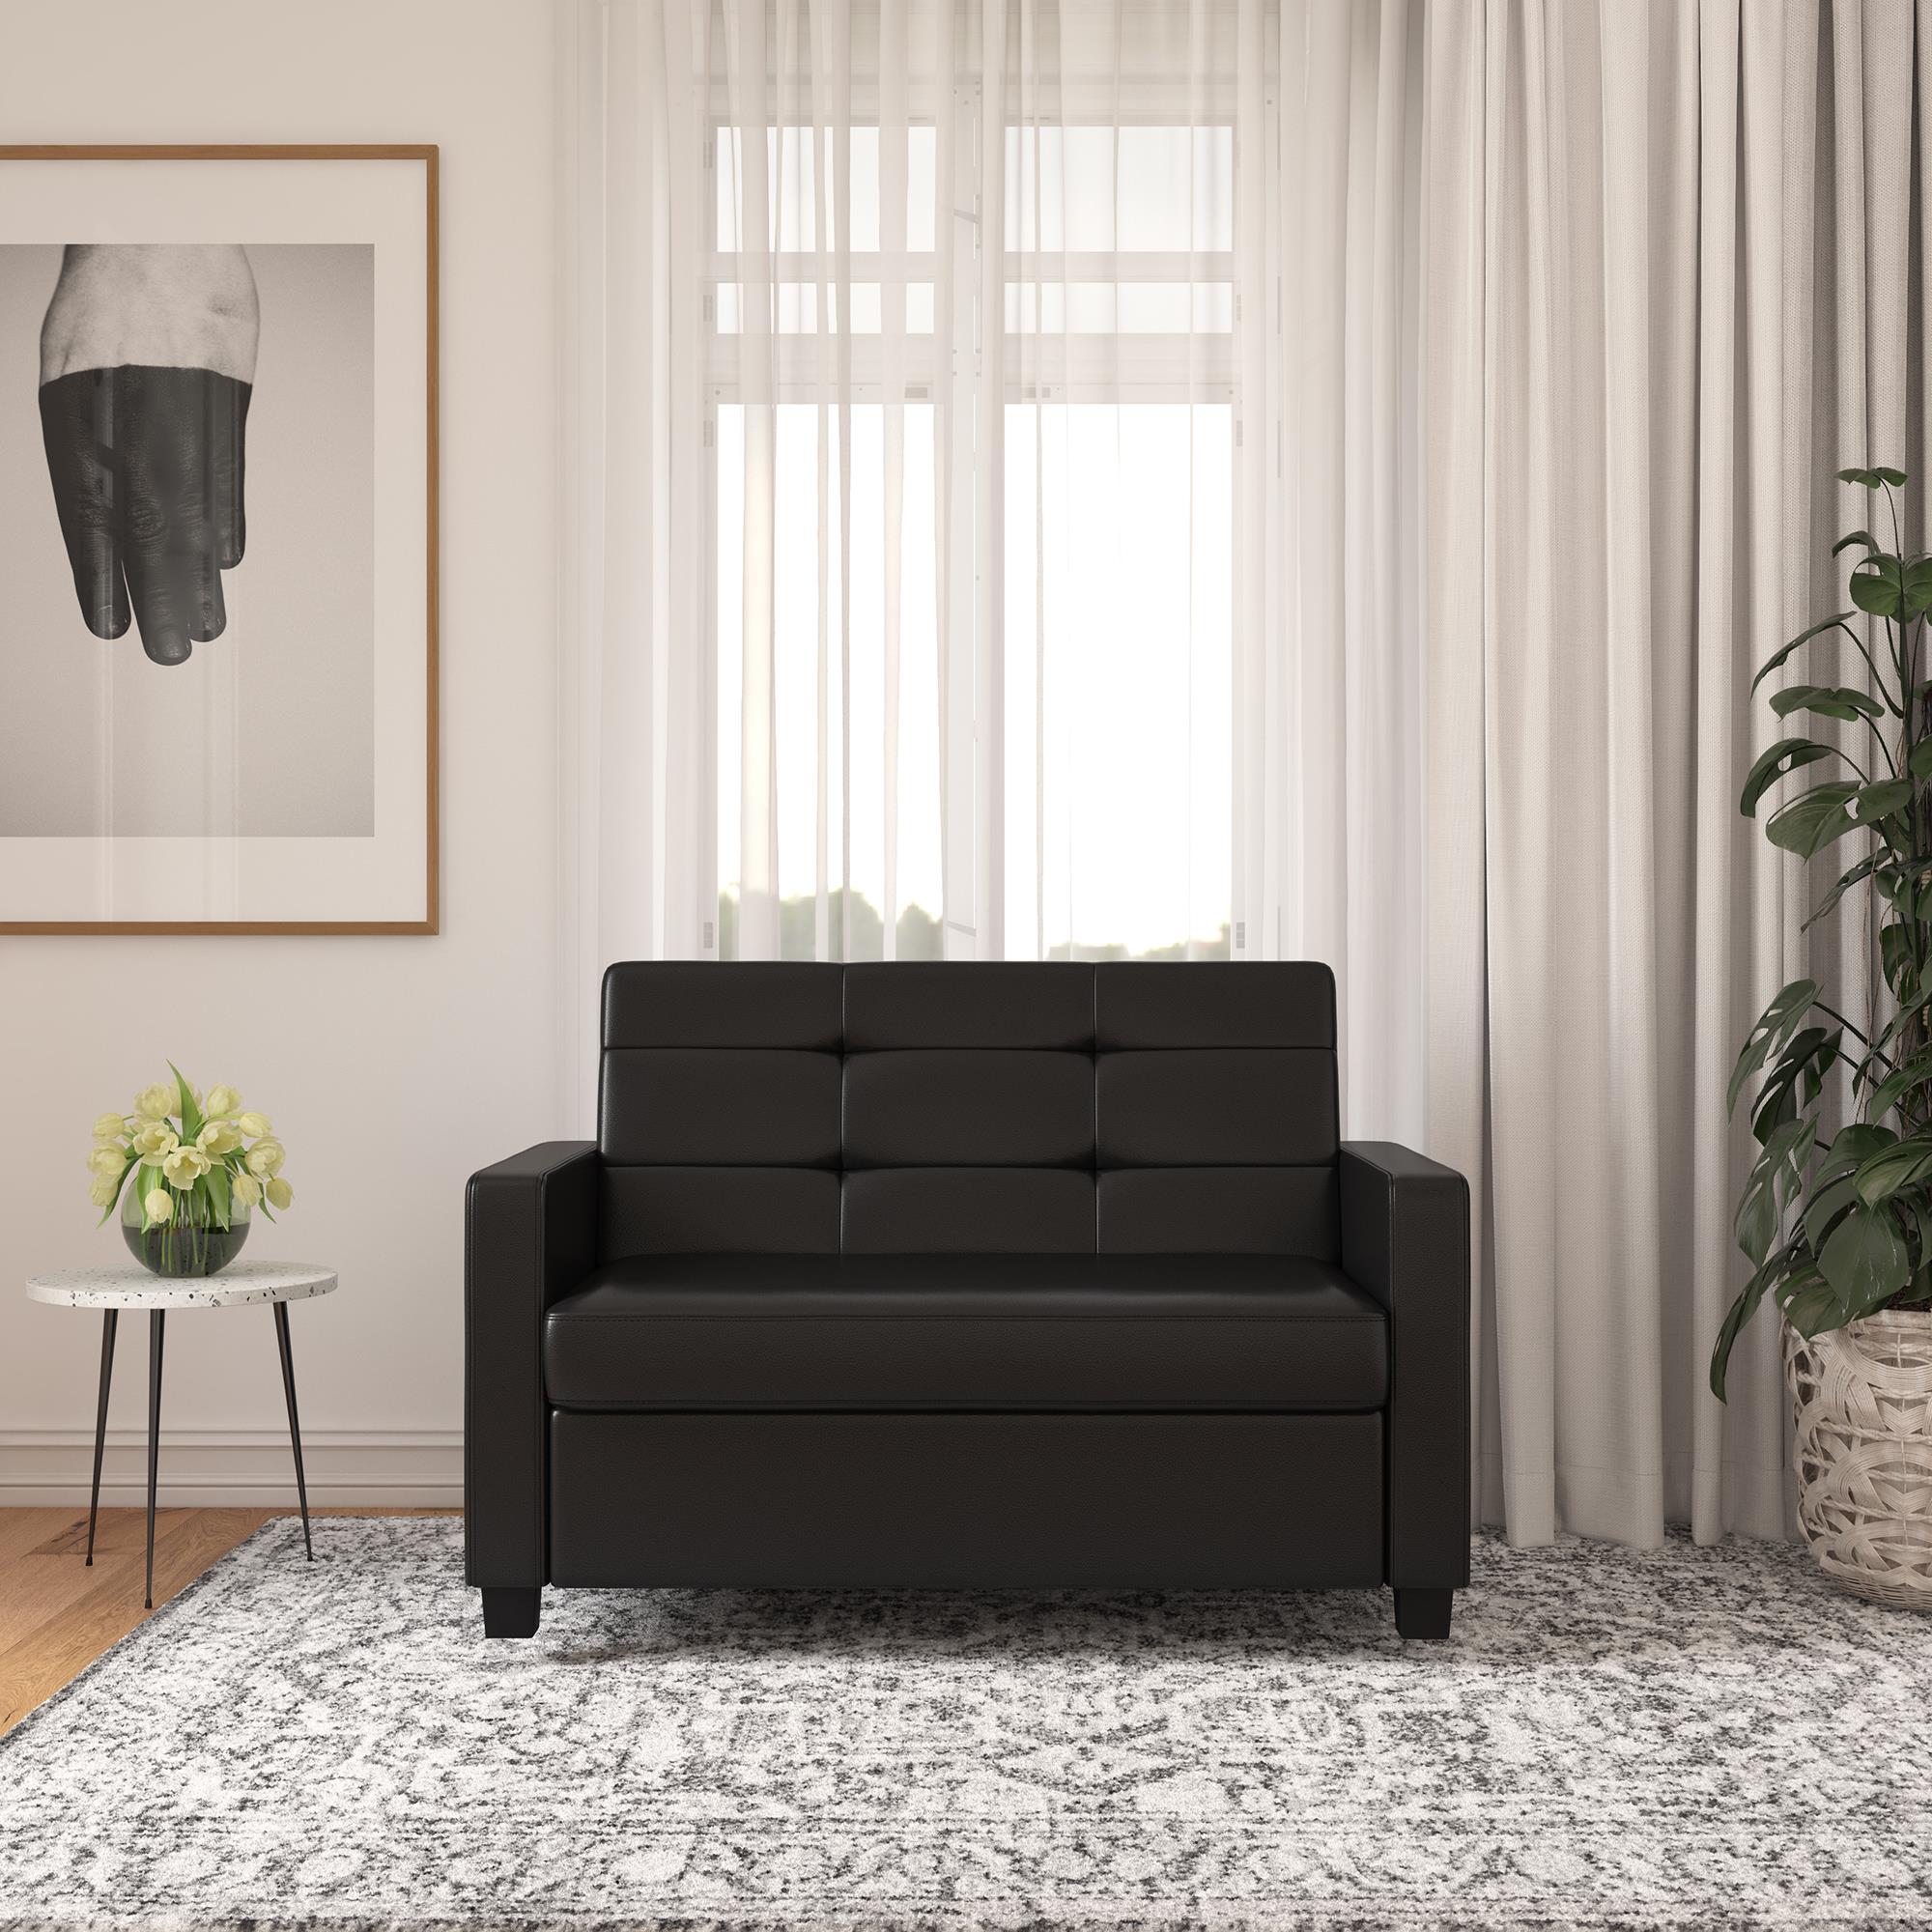 Mainstays Loveseat Sleeper Sofa with Twin Memory Foam Mattress, Black Faux Leather - image 3 of 27